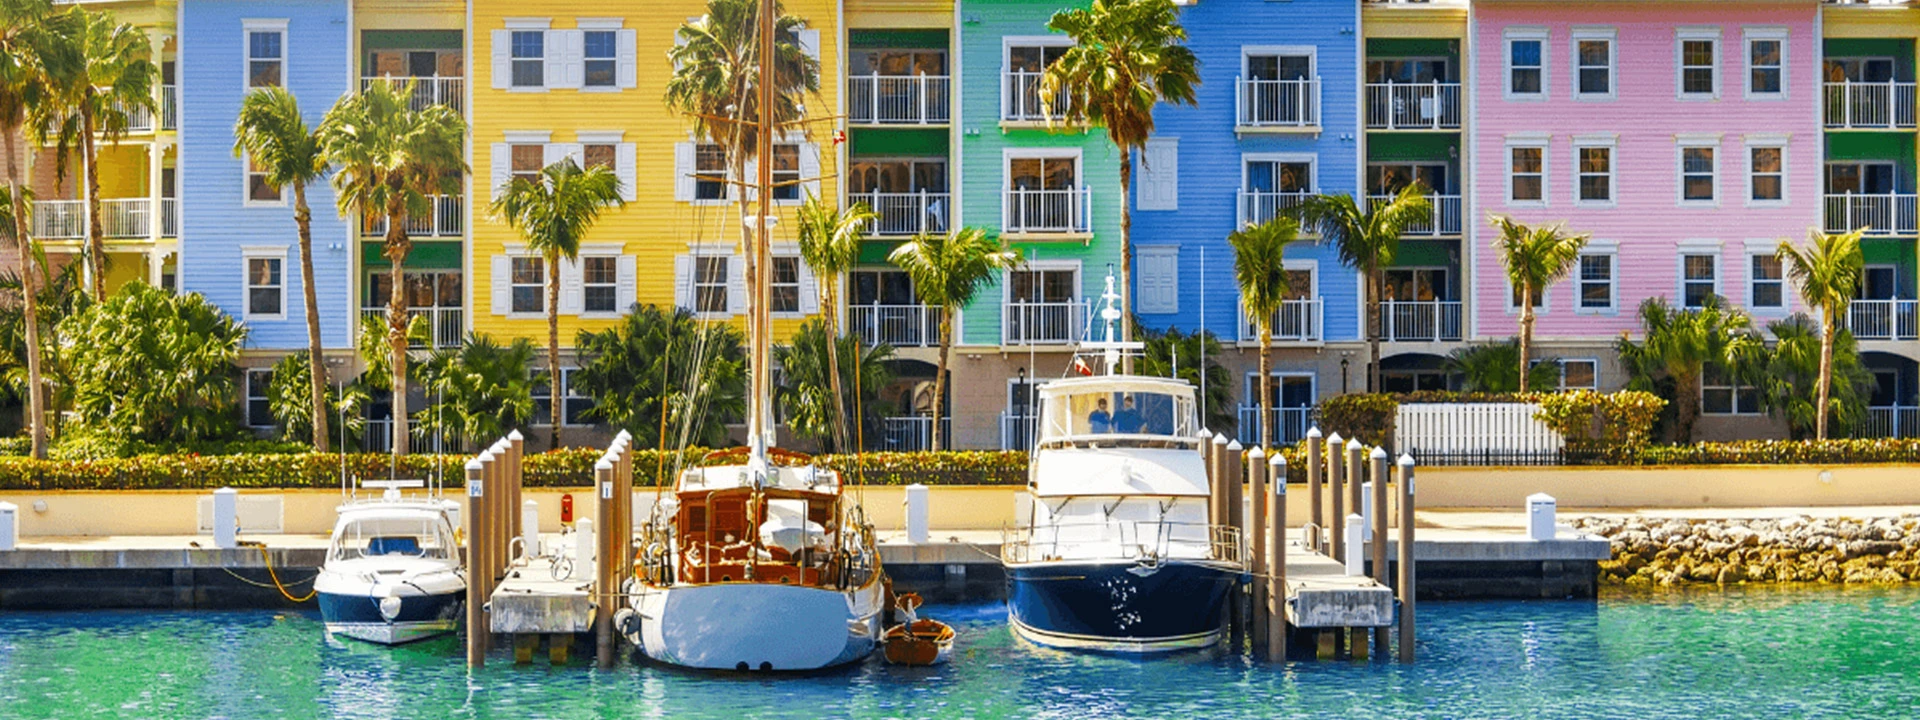 harbour and colourful buildings in the Bahamas on a Caribbean cruise